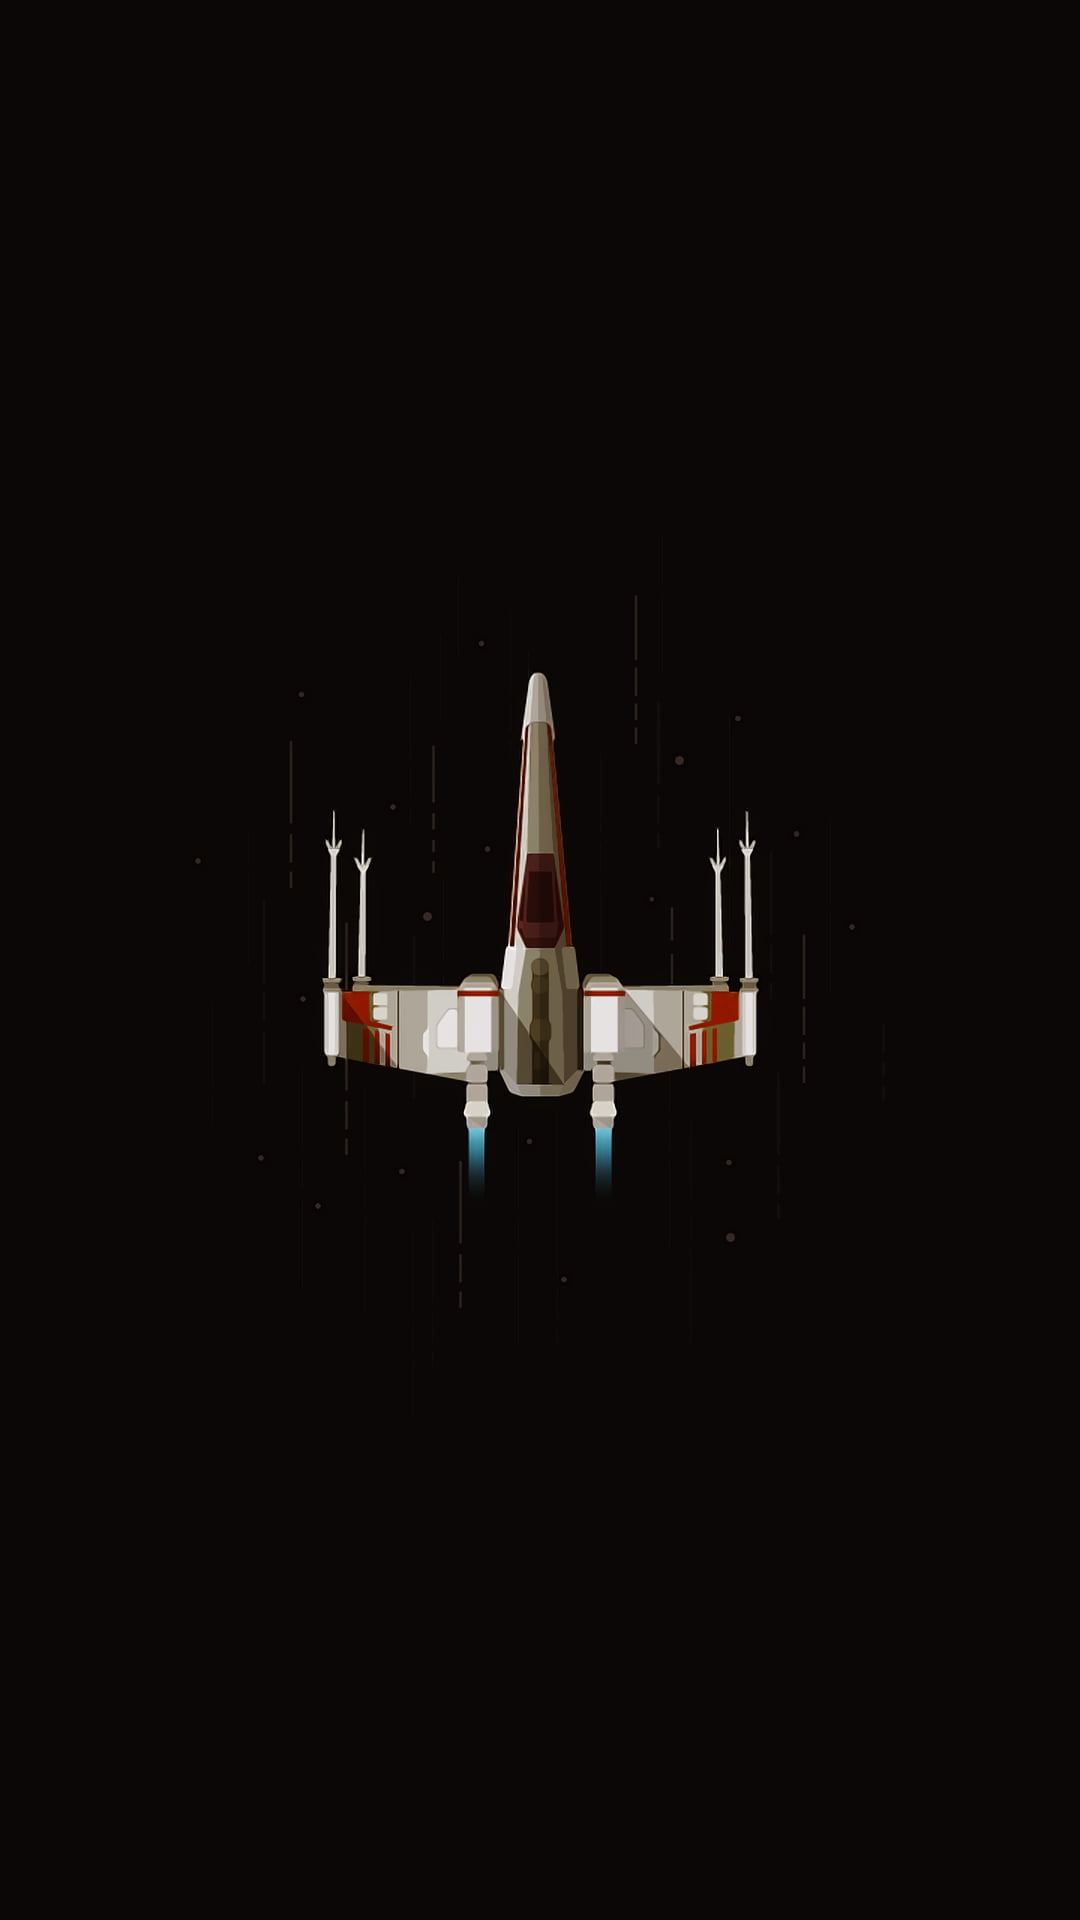 white and red space craft, digital art, portrait display, rocket